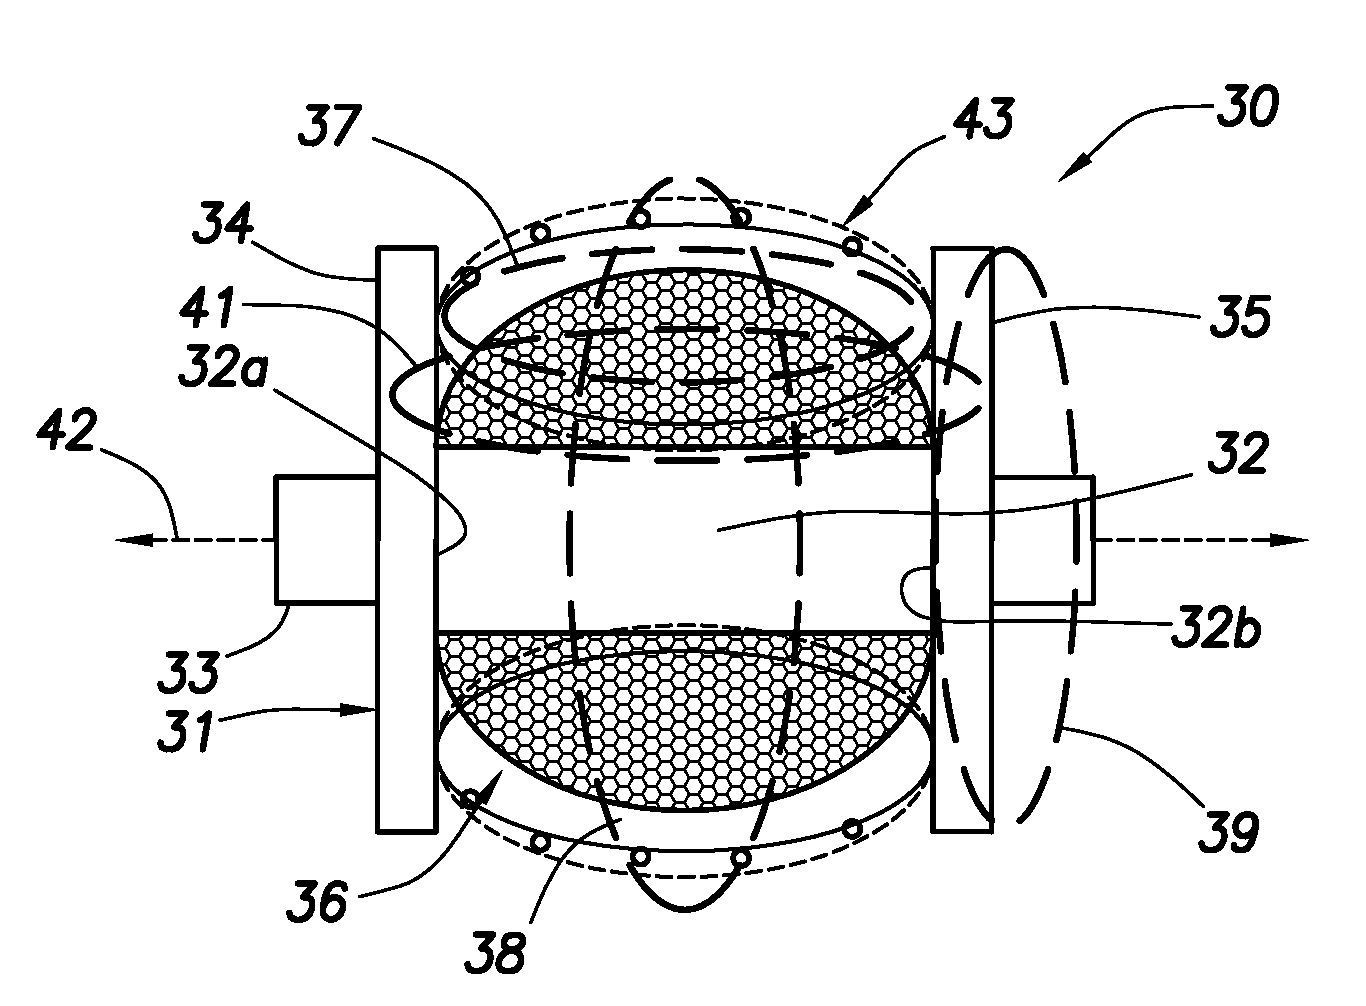 Antennas for Deep Induction Array Tools with Increased Sensitivities